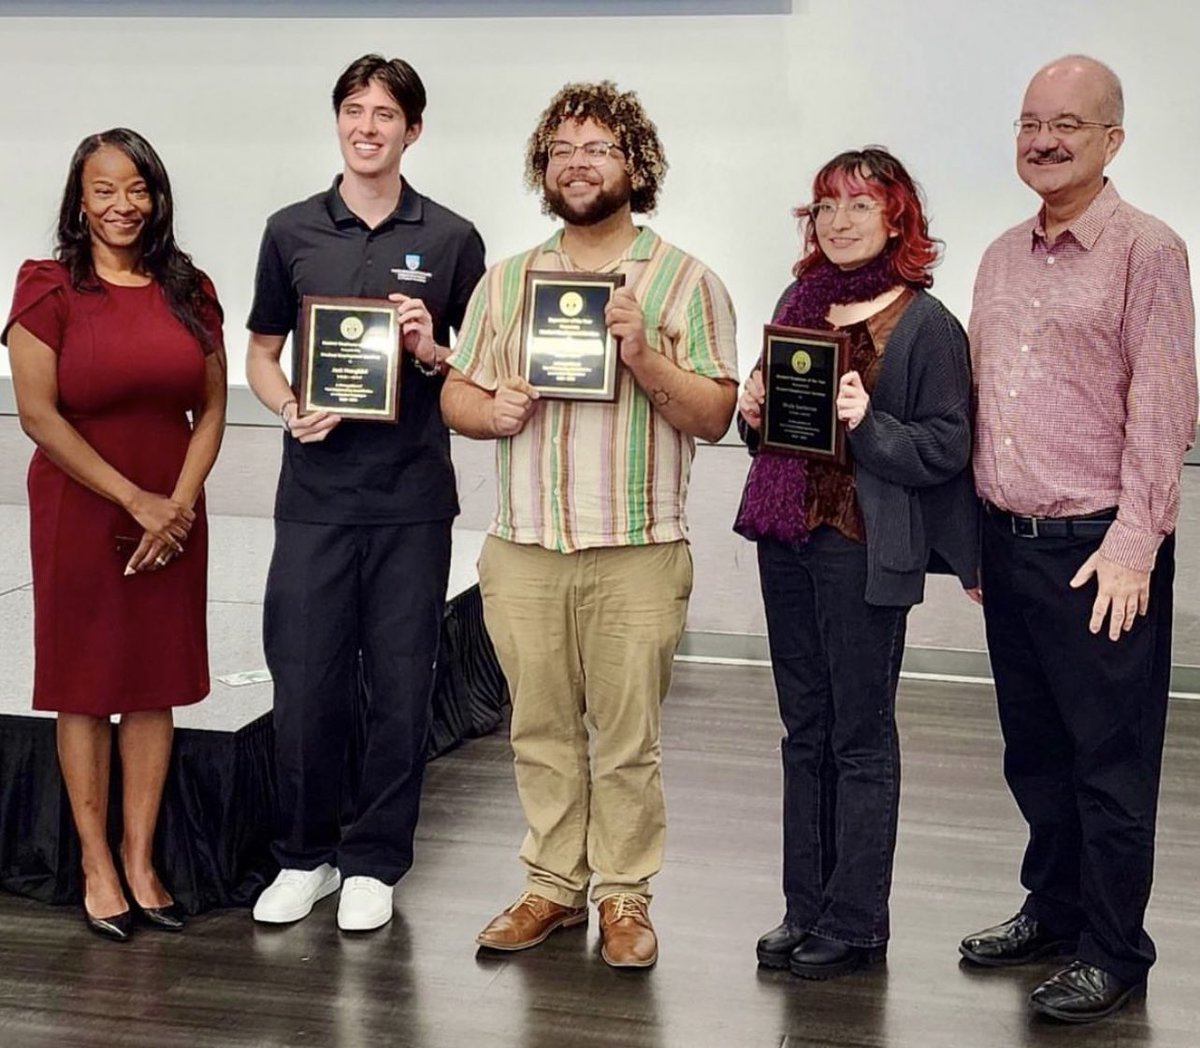 We celebrated National Student Employment Week April 17. Congratulations to: Undergraduate Employee of the Year (Campus Recreation) - Jack Supervisor of the Year - Jamal Graduate Employee of the Year (@lmubellarmine Dean’s Office) - Skyla